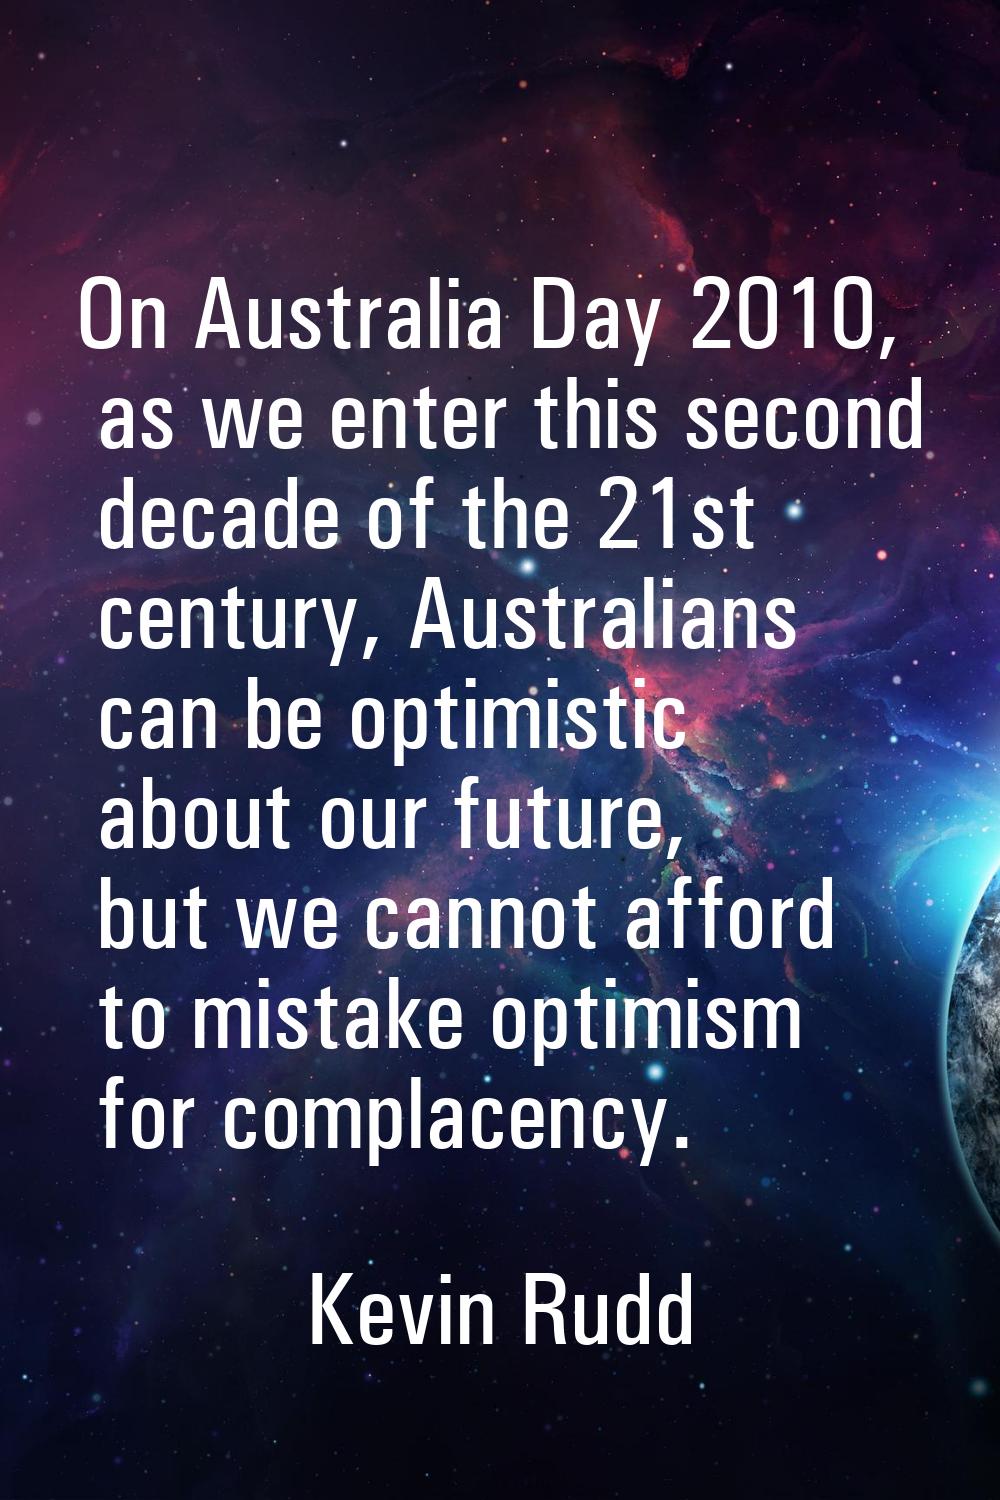 On Australia Day 2010, as we enter this second decade of the 21st century, Australians can be optim